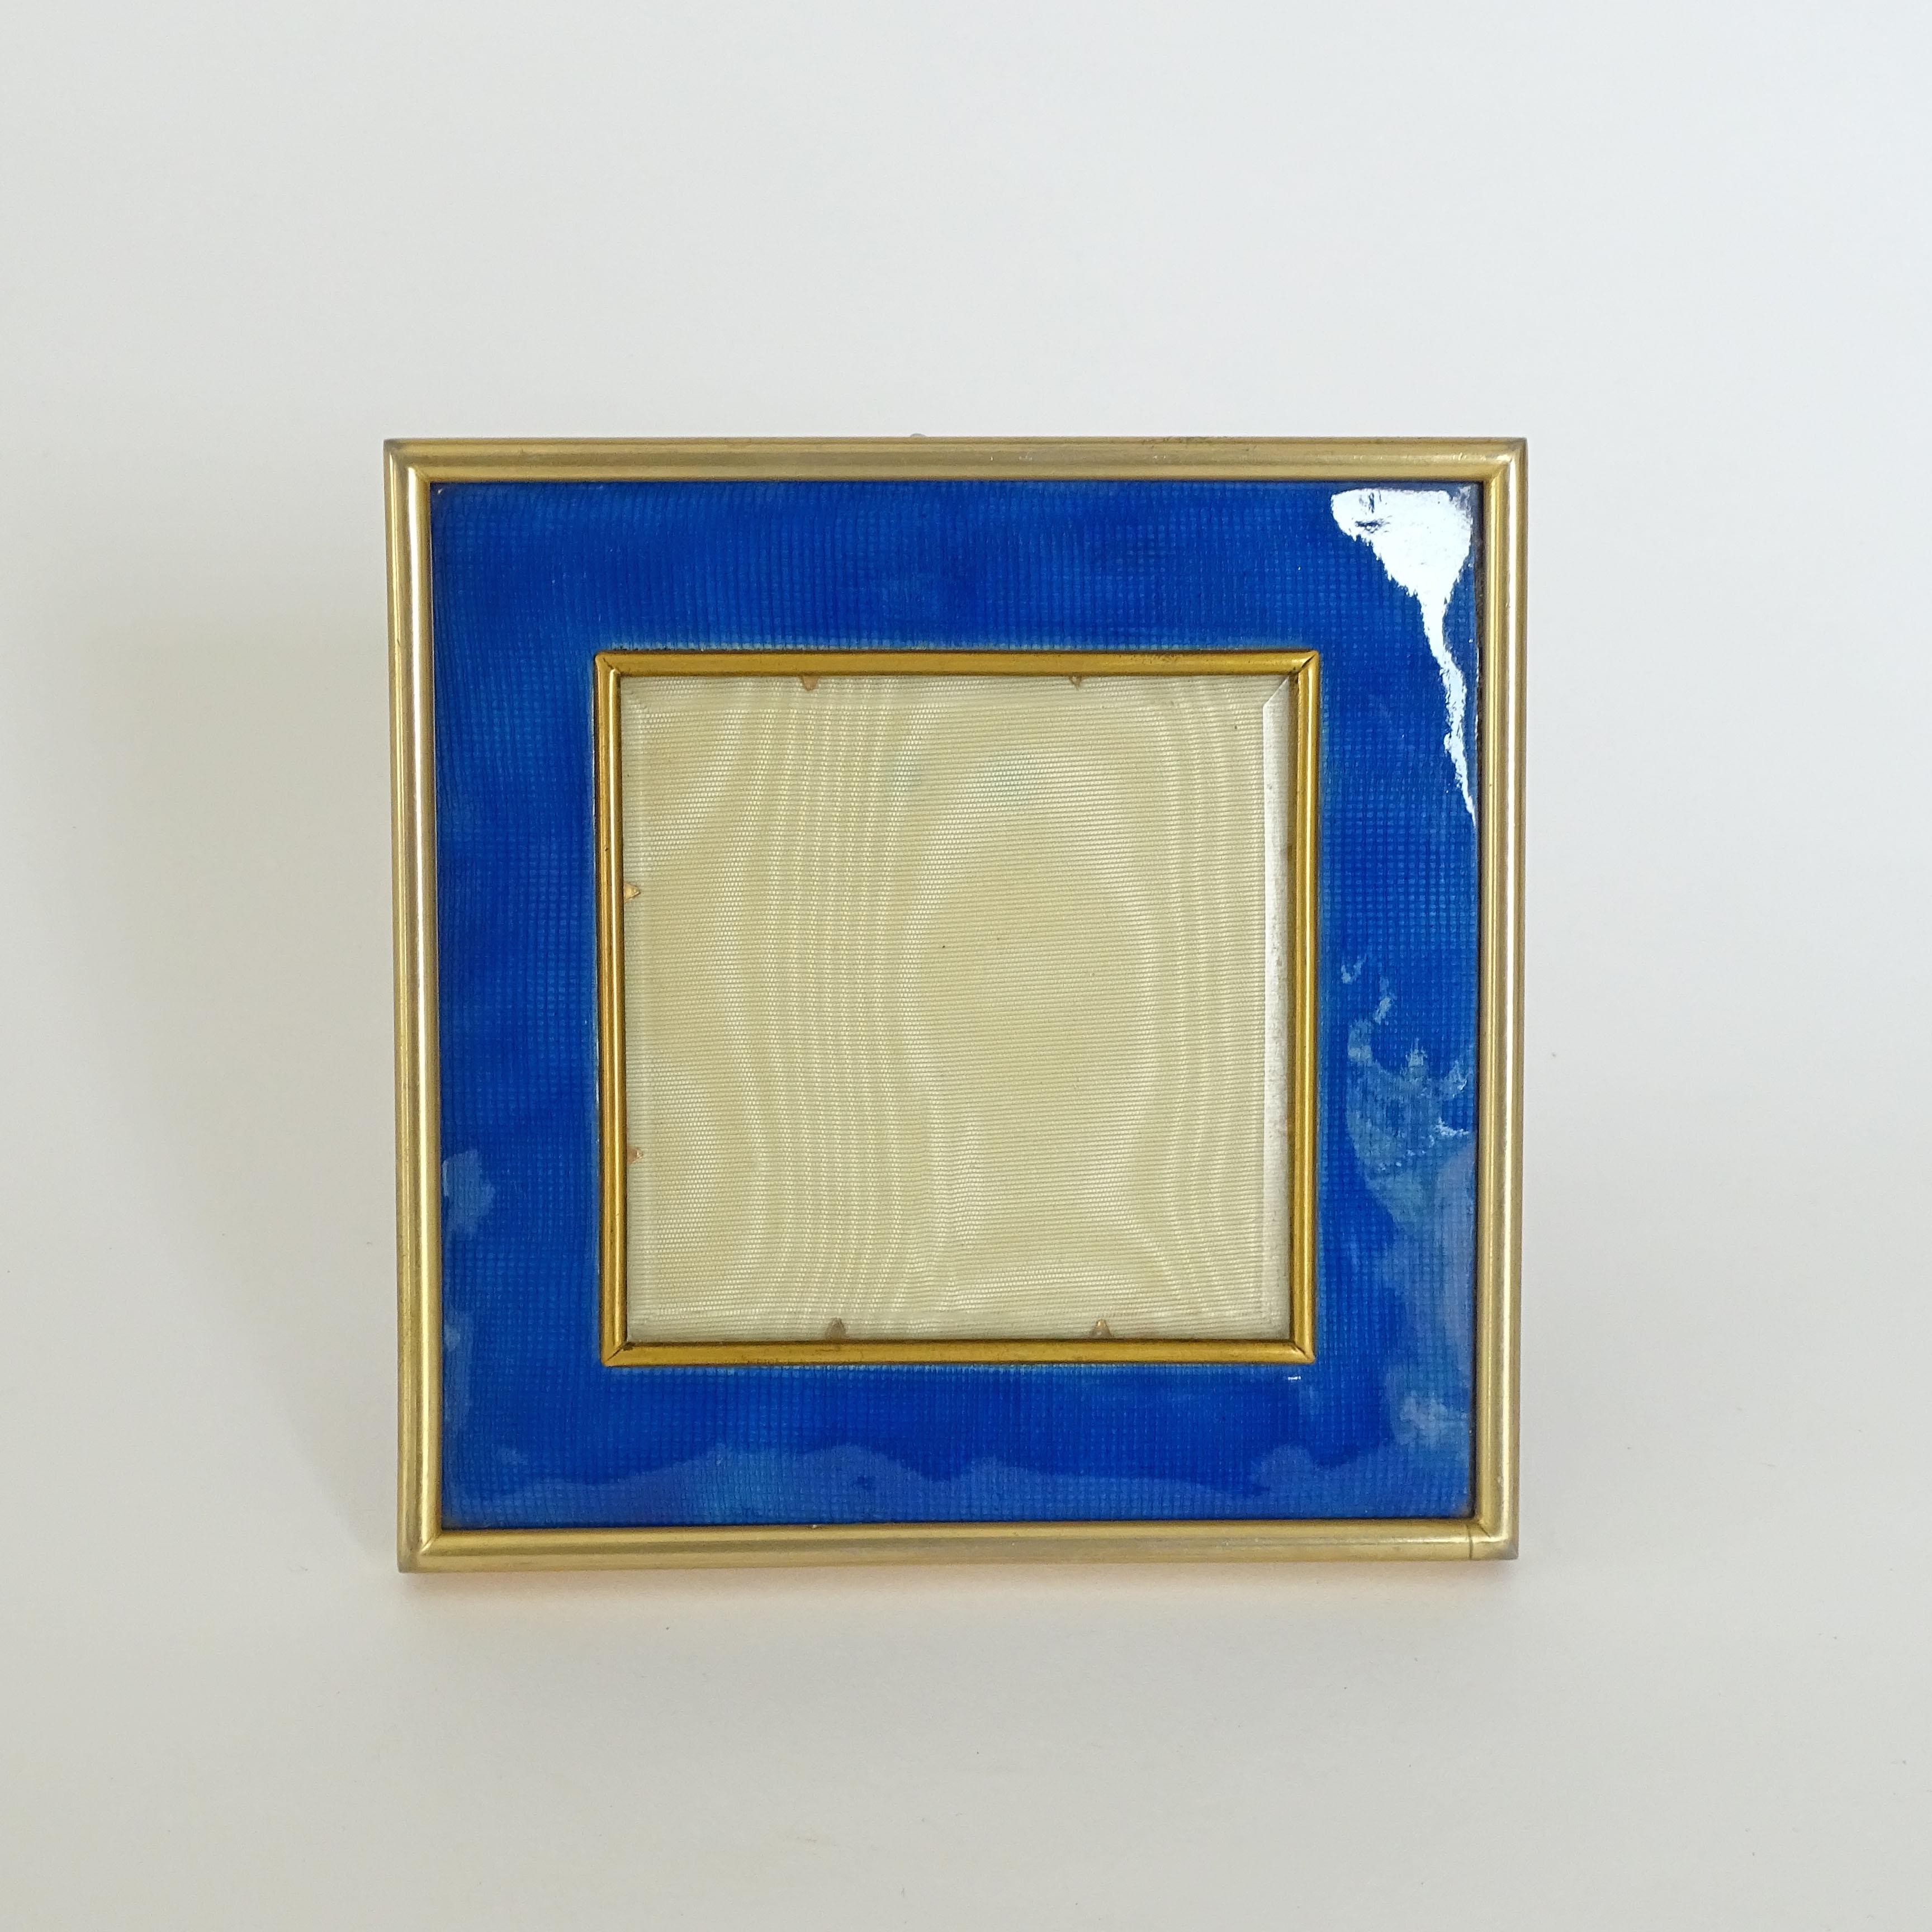 Precious small desk photo frame in a gold metal and brilliant blue enamel.
Italy 1940s
